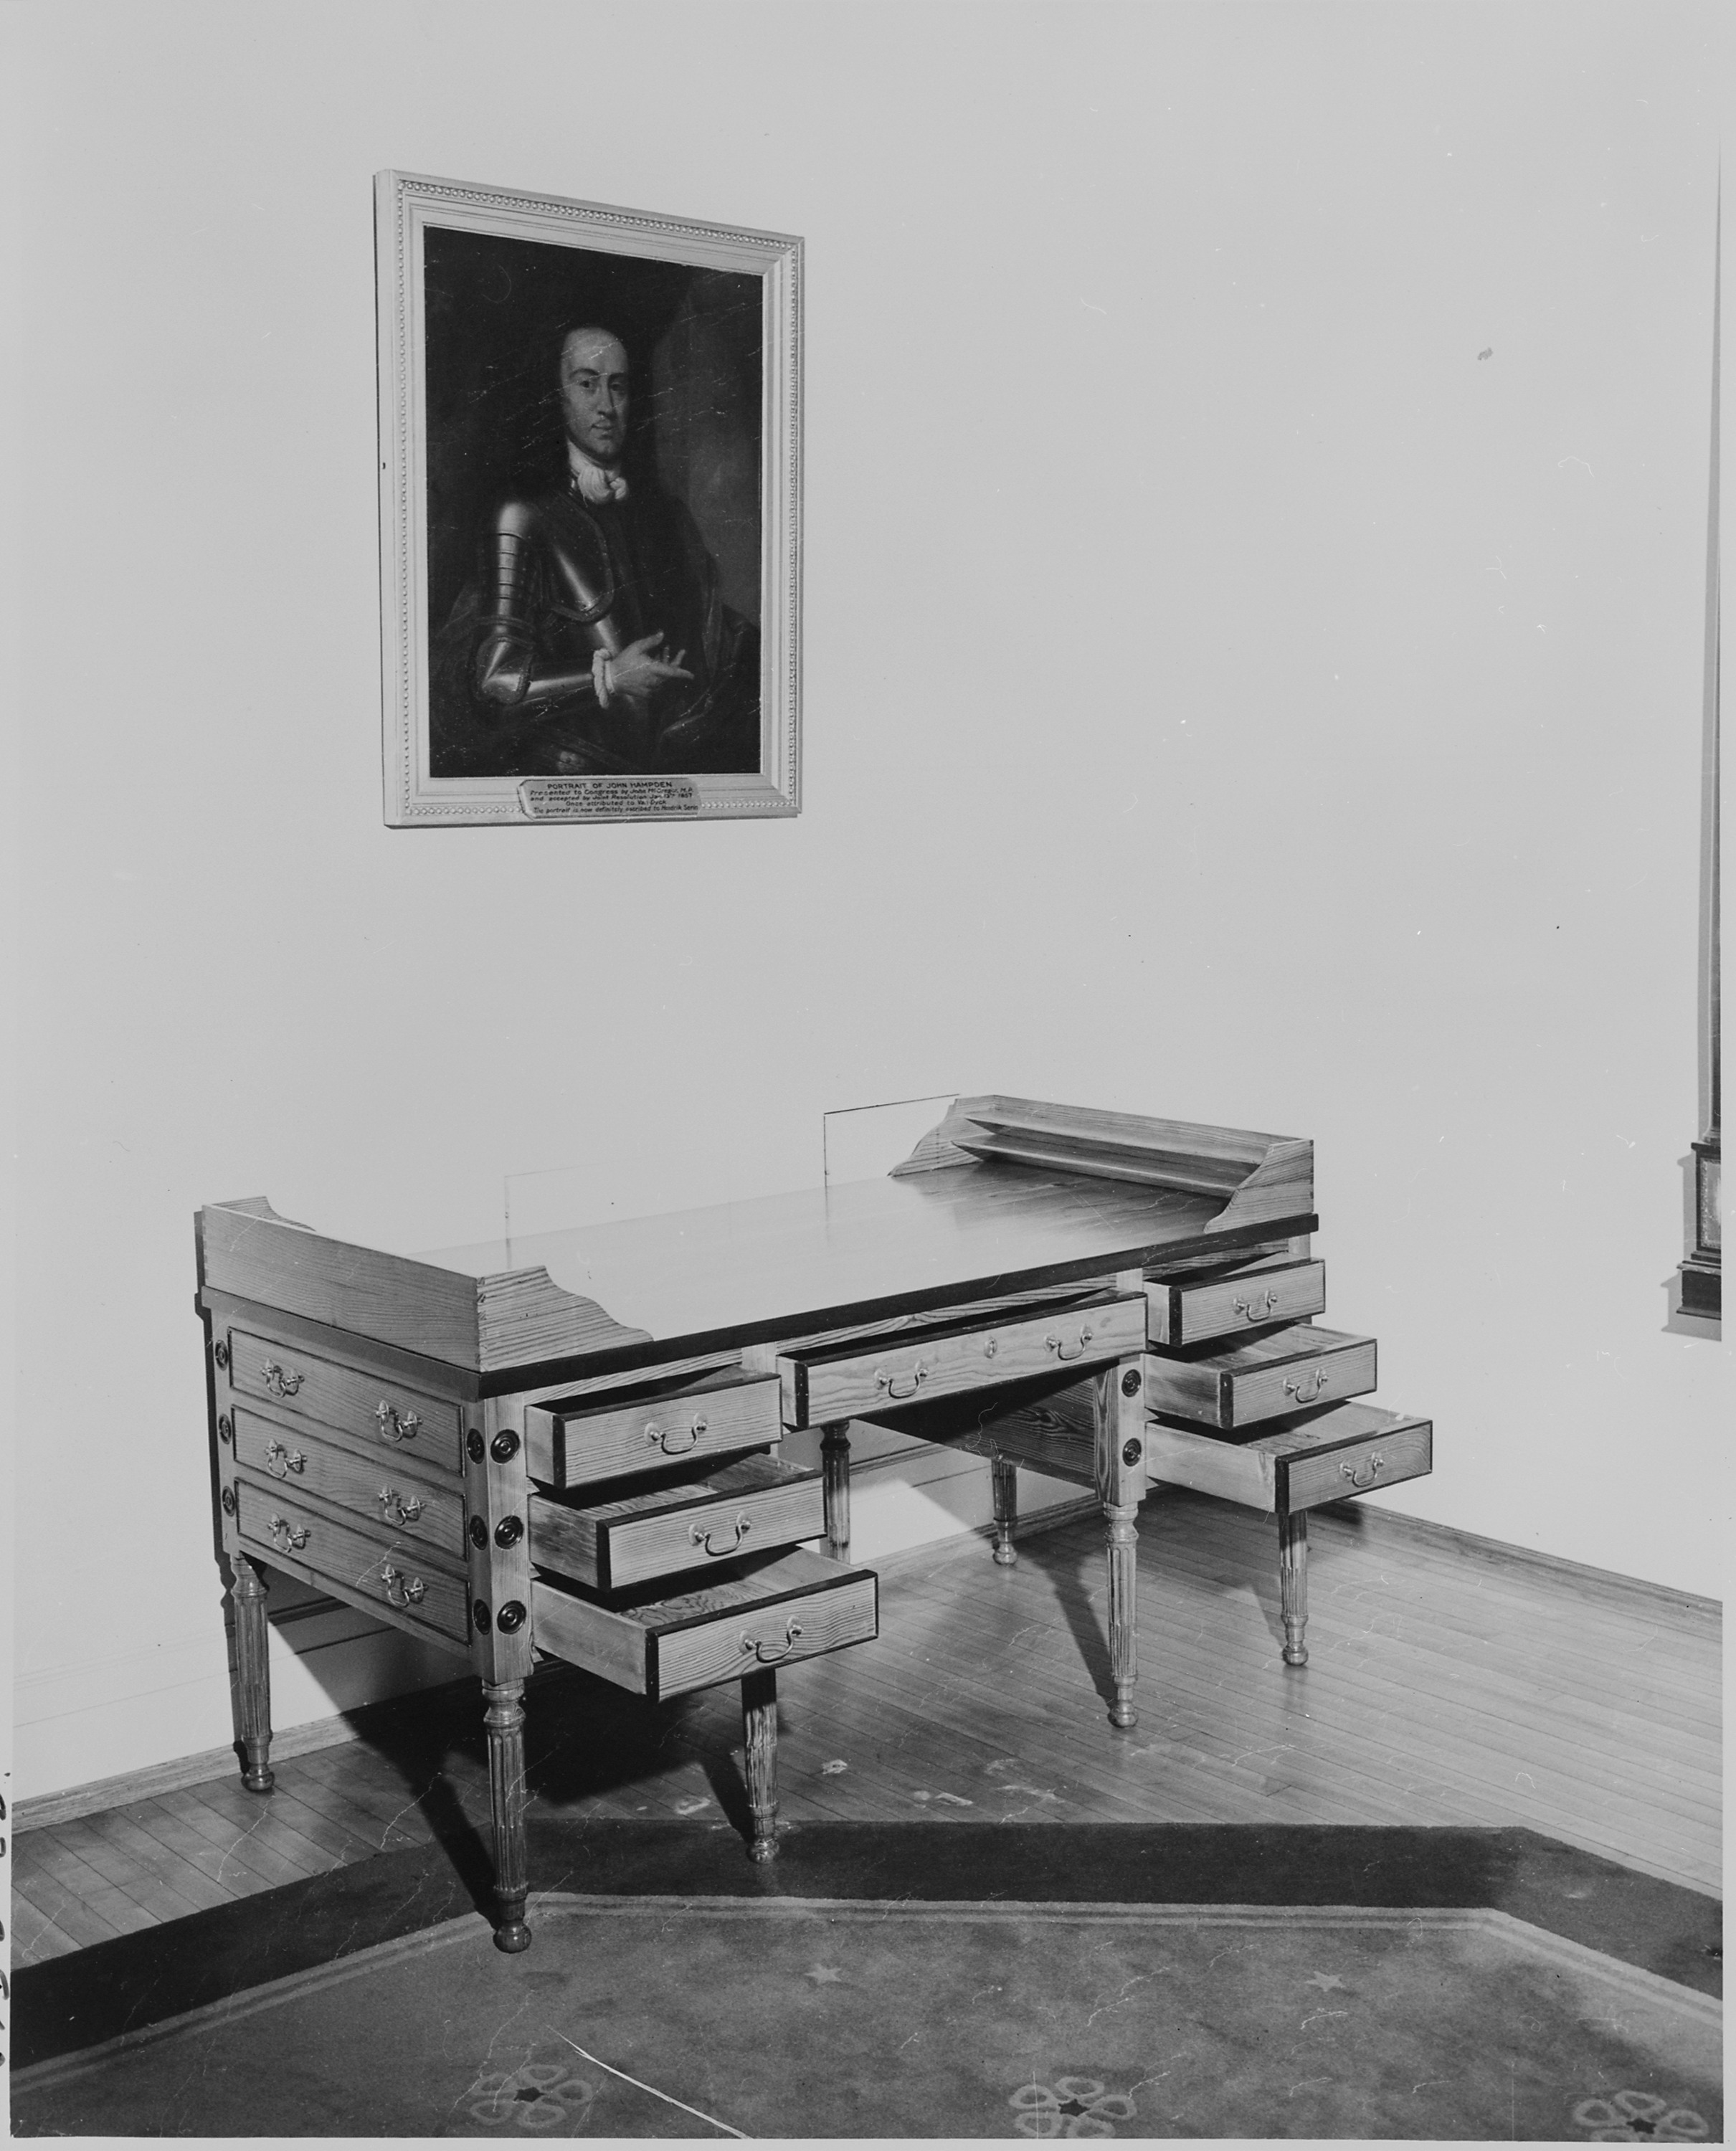 A copy of a desk used by George Washington, made for use in the White House during the administration of President... - NARA - 199968